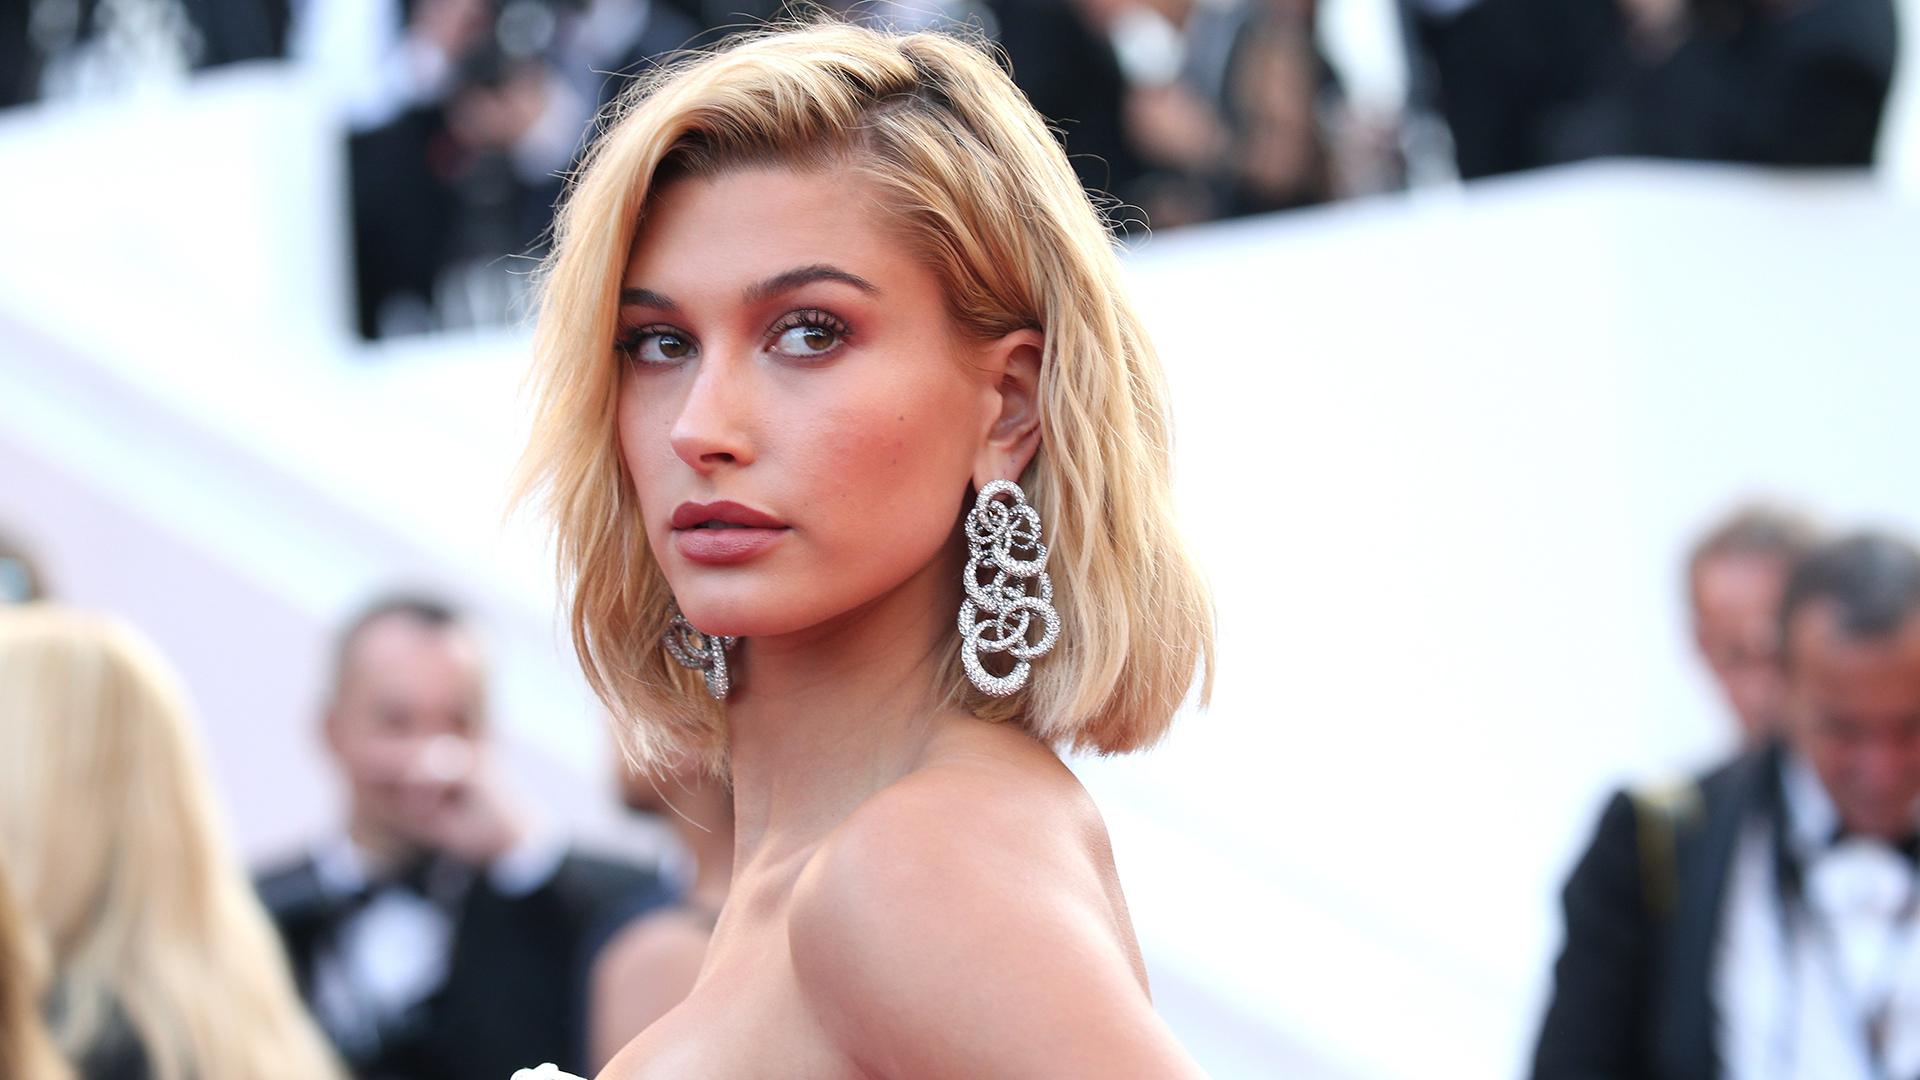 Hailey Baldwin Says Money Doesn't Equal Happiness